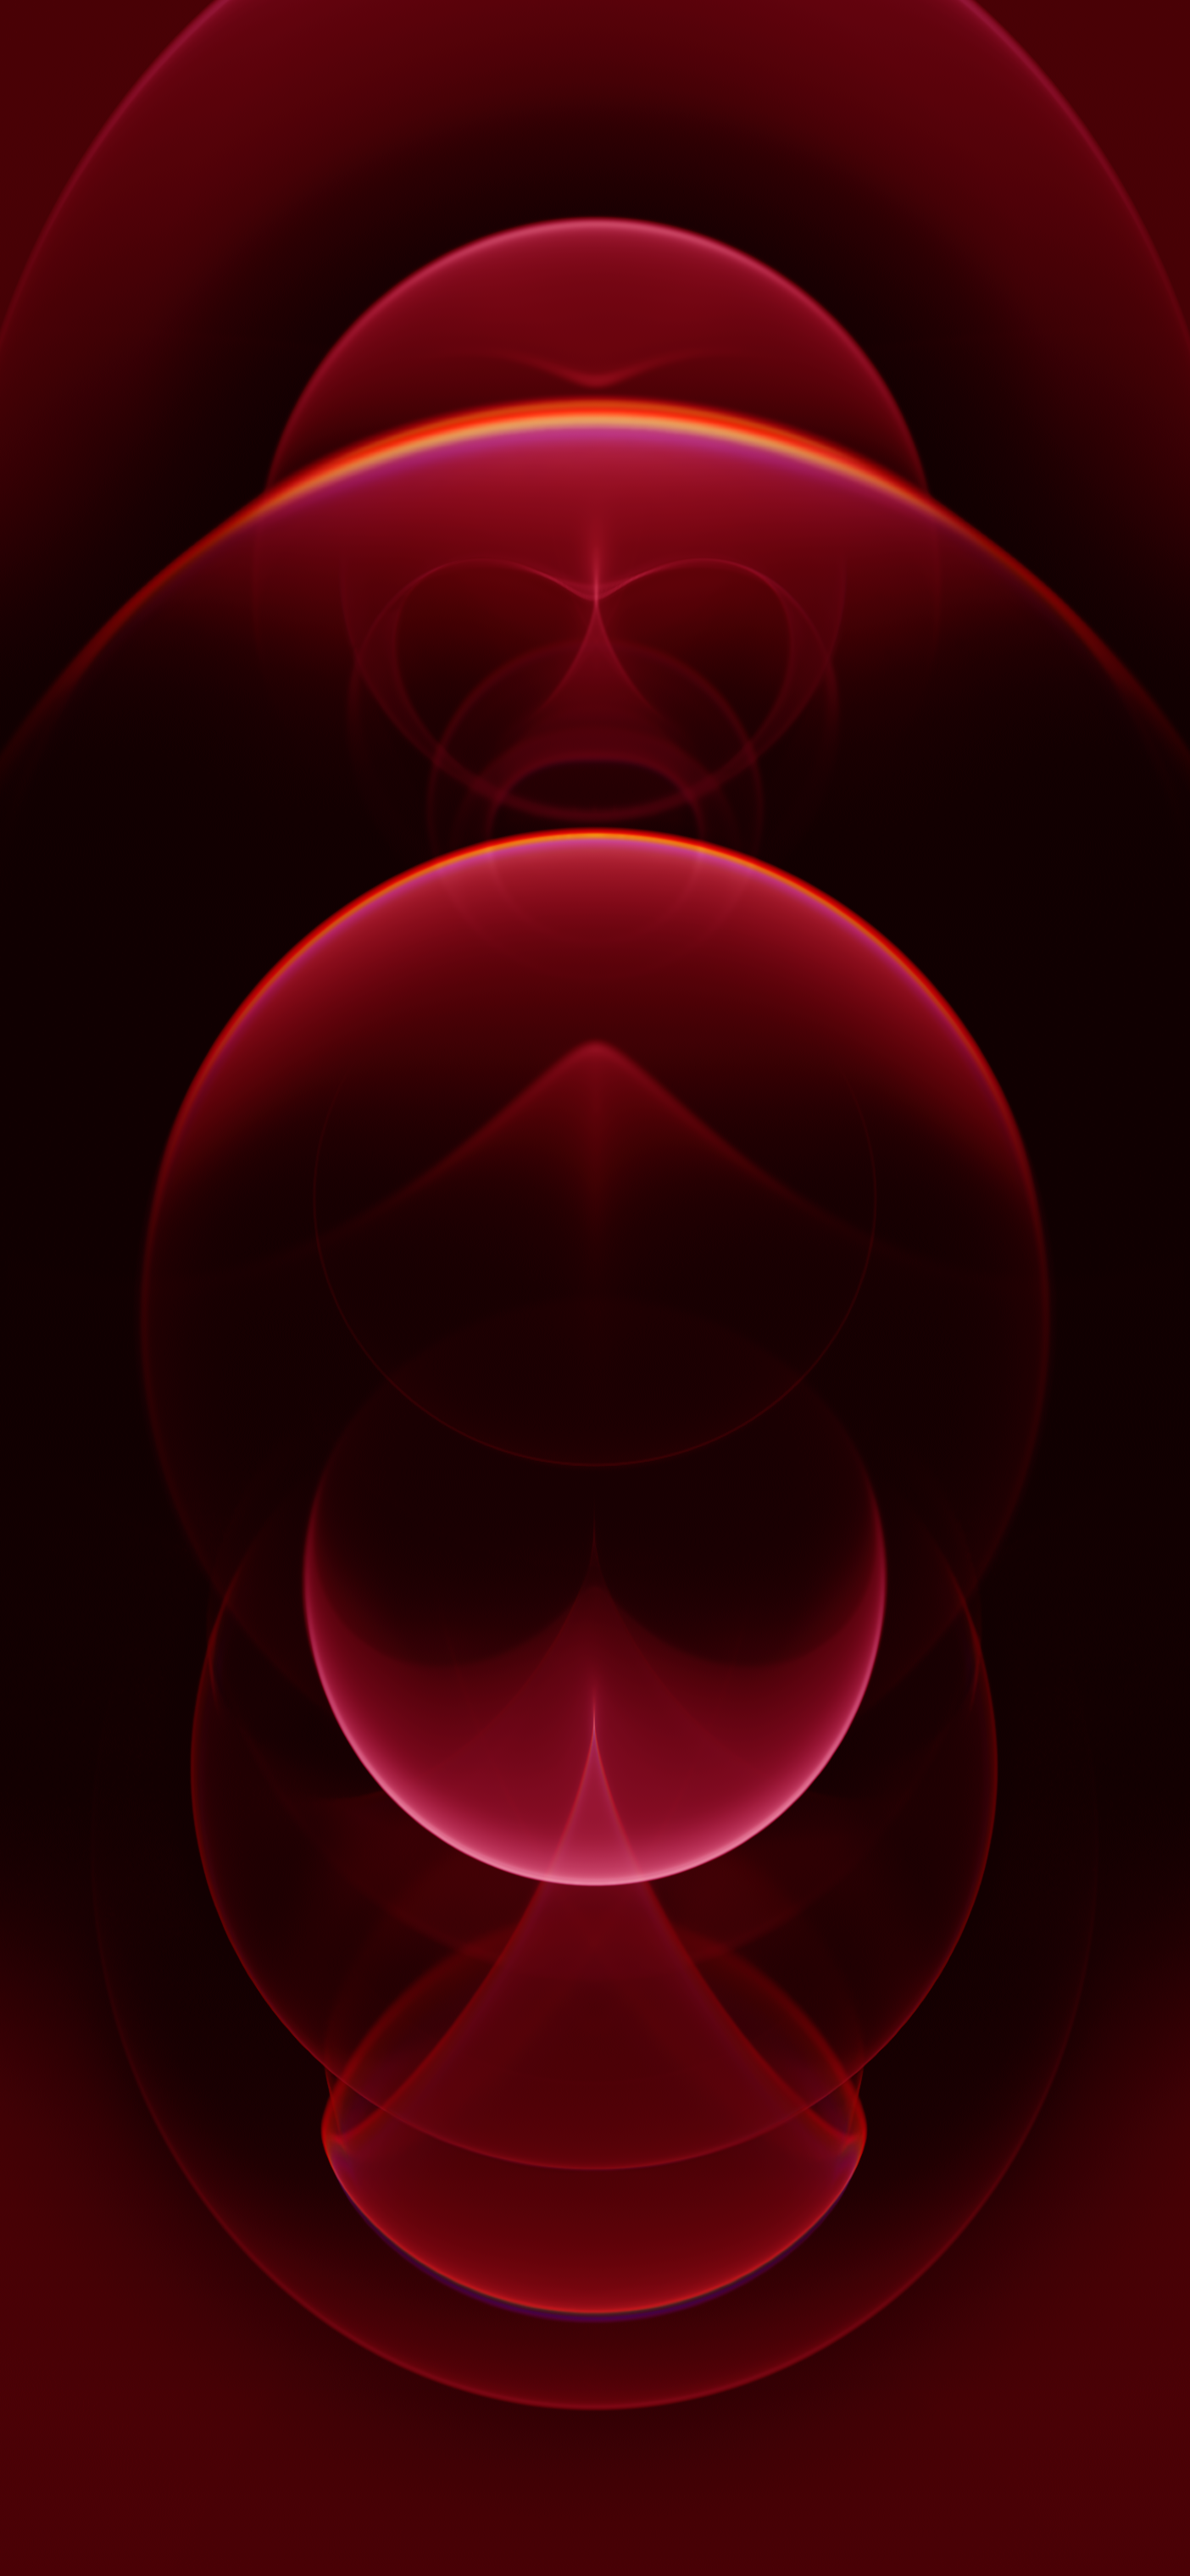 iPhone 12 Pro Max Wallpaper. iPhone red wallpaper, Apple wallpaper iphone, Original iphone wallpaper